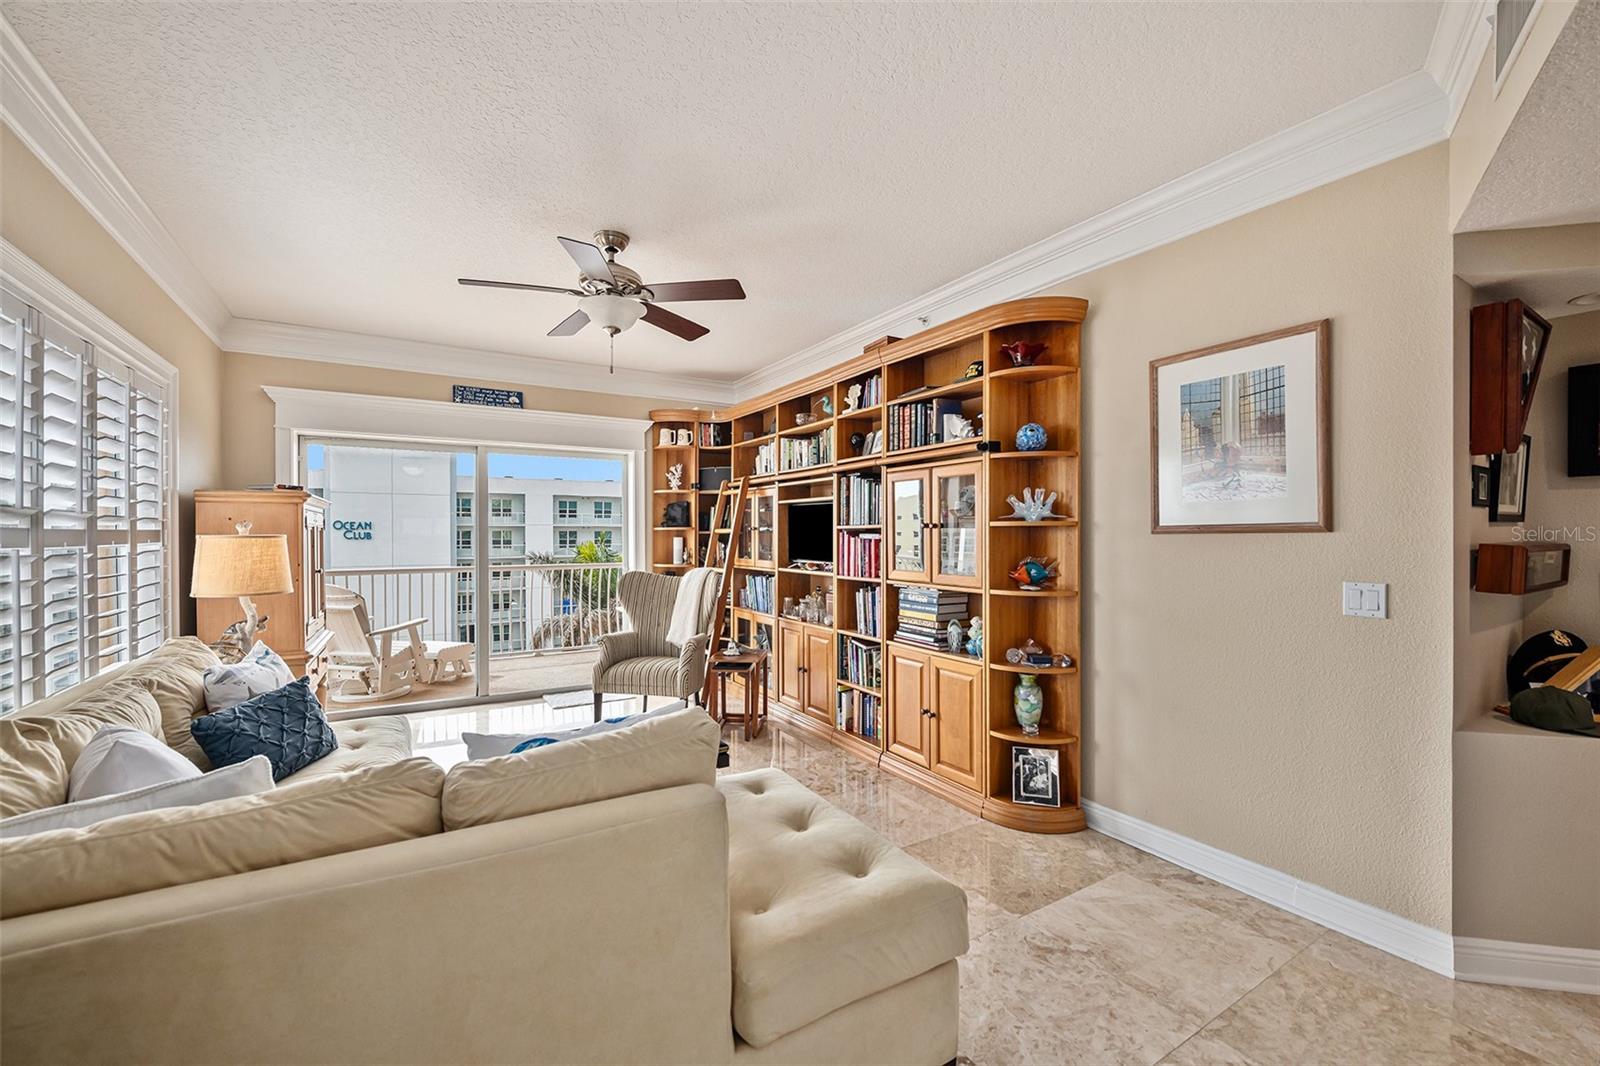 Imagine having a condo with BOTH a Great Room AND a Family Room boasting of water views from each room!